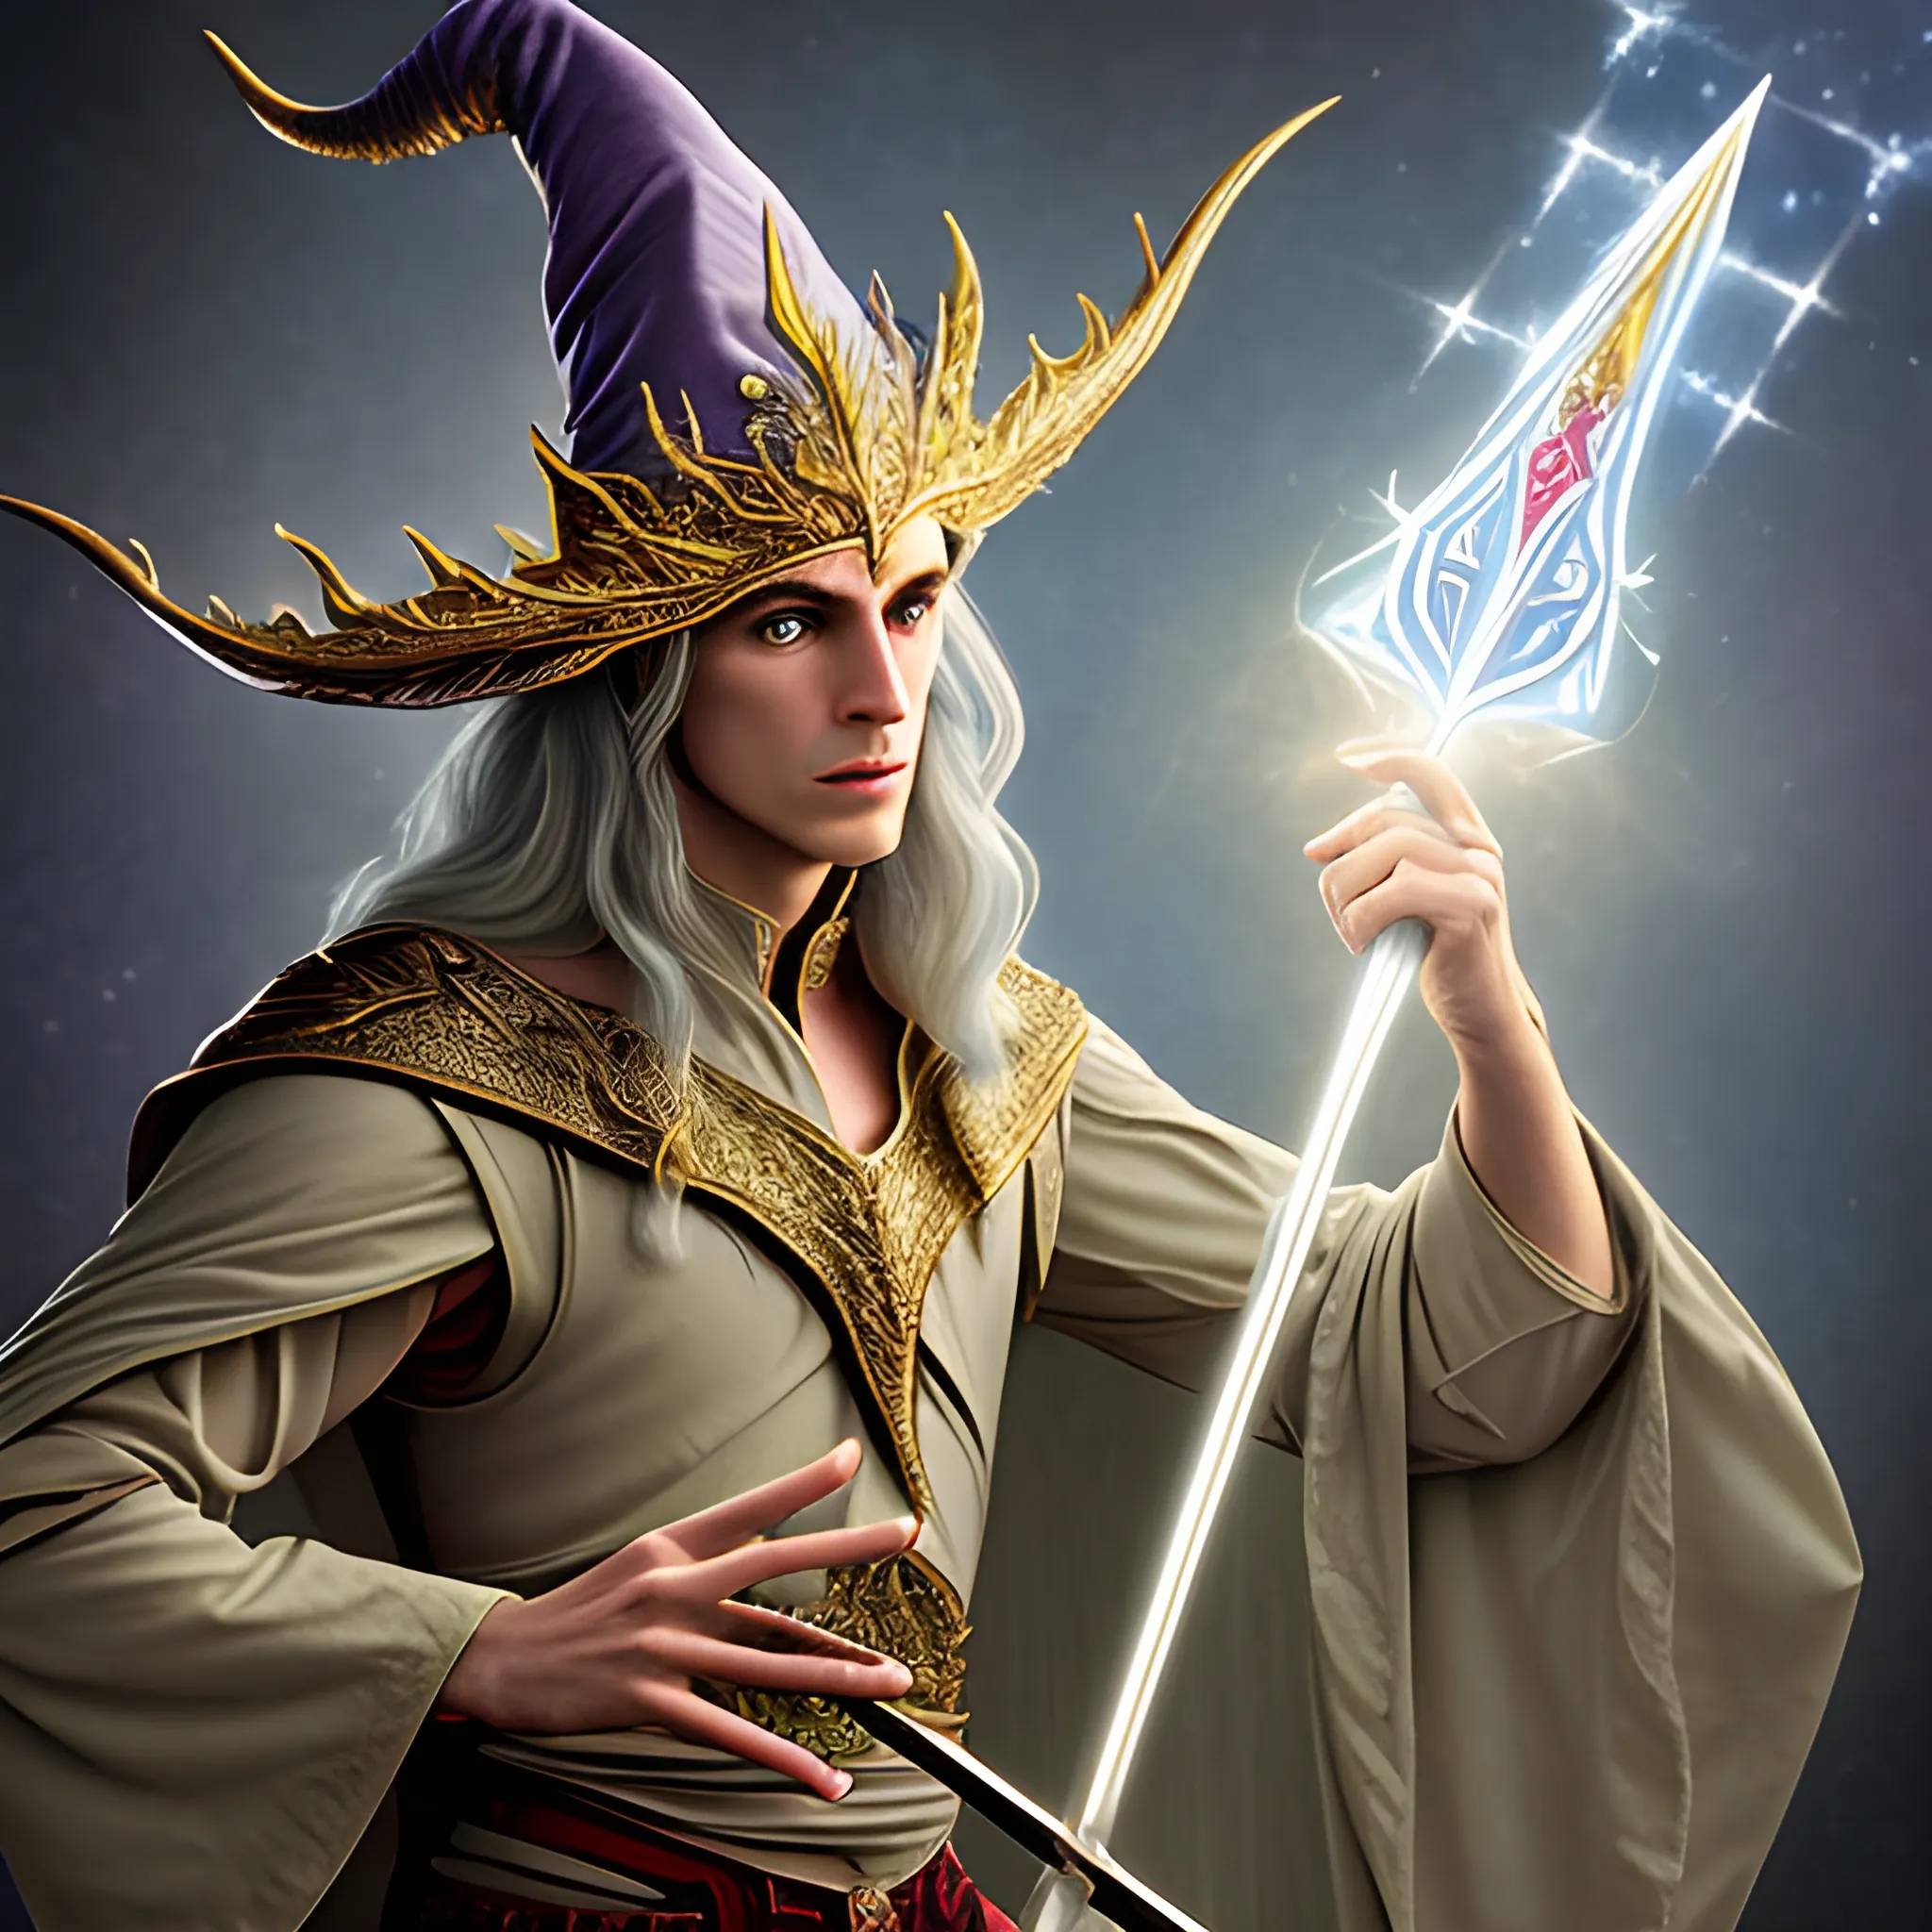 Behold the magnificent portrayal of an ethereal elven wizard adorned with an extravagant hat that reaches for the heavens wielding a gleaming rapier as his chosen instrument of arcane might 